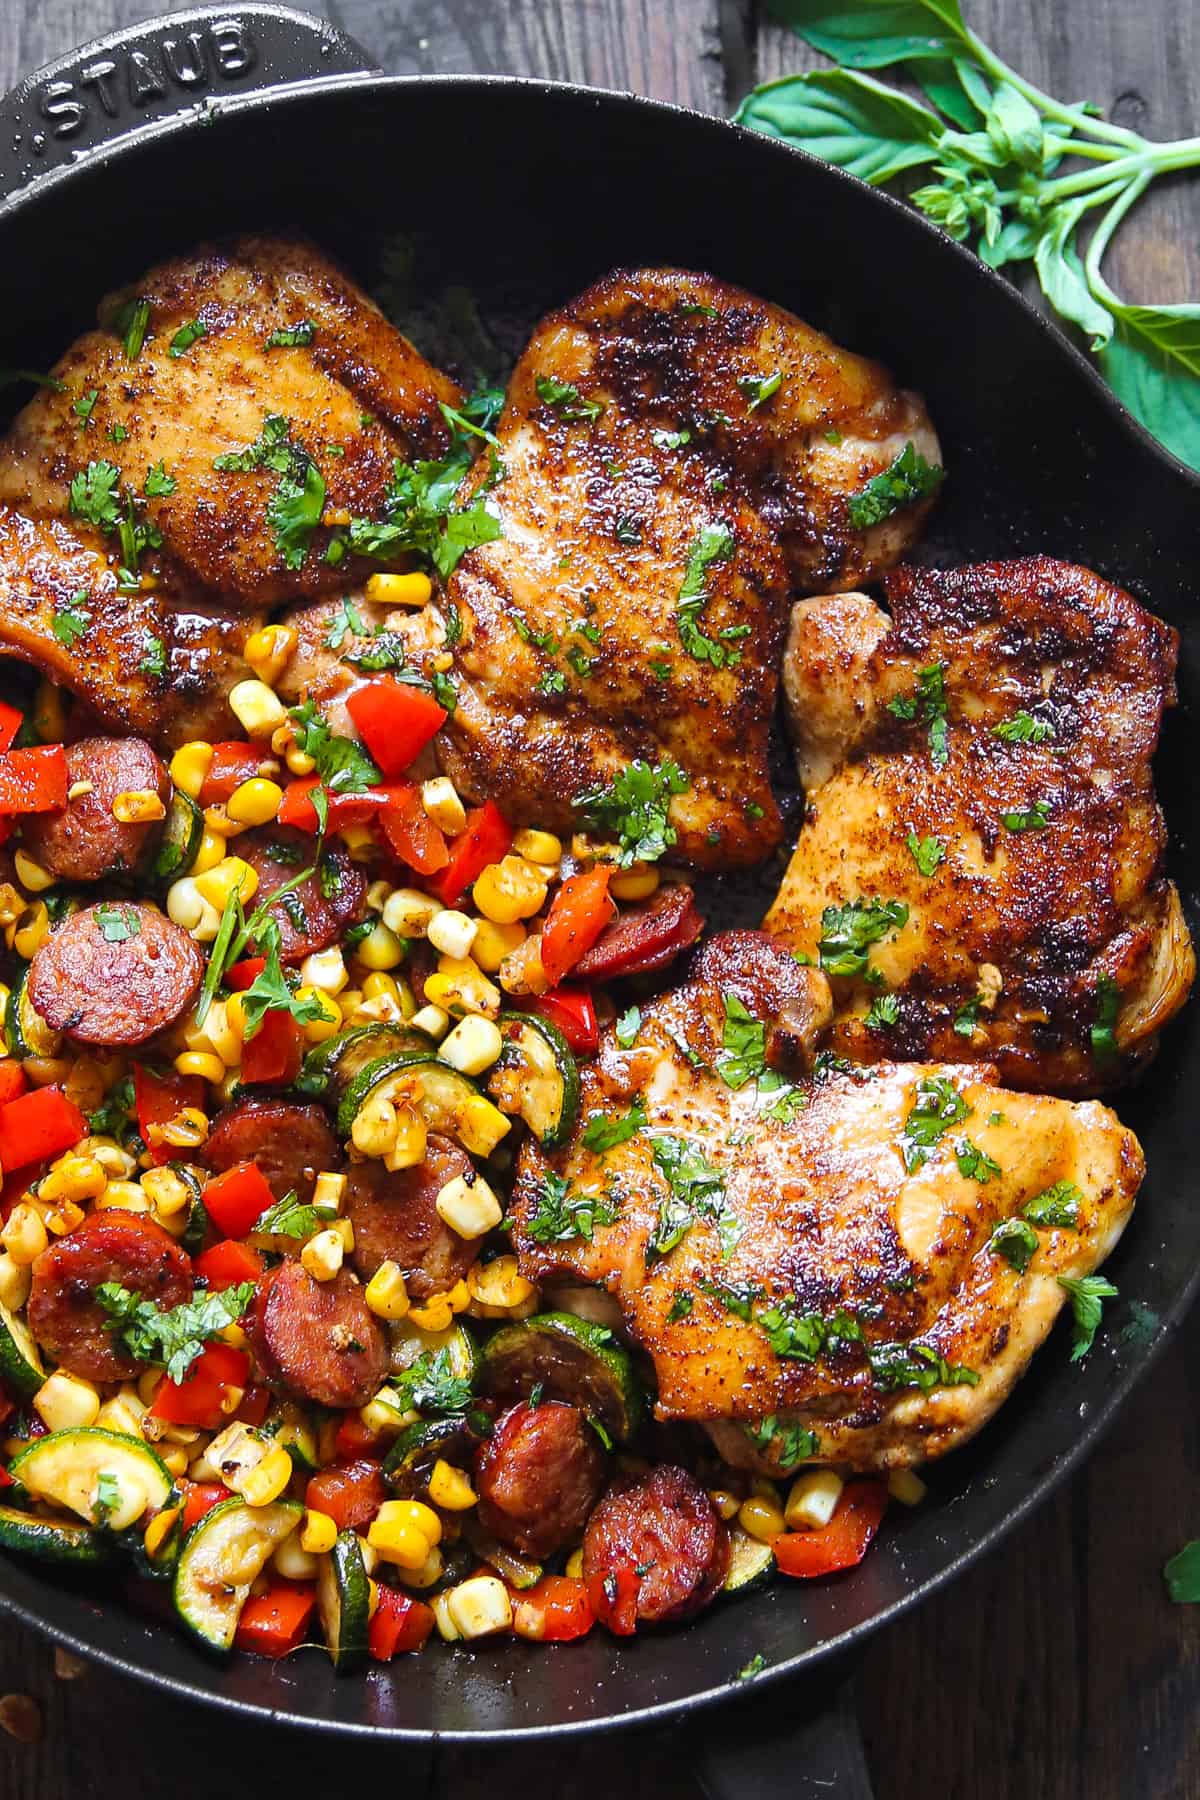 Chicken Sausage and Vegetable Skillet with Corn, Zucchini, and Bell Peppers in a cast iron pan